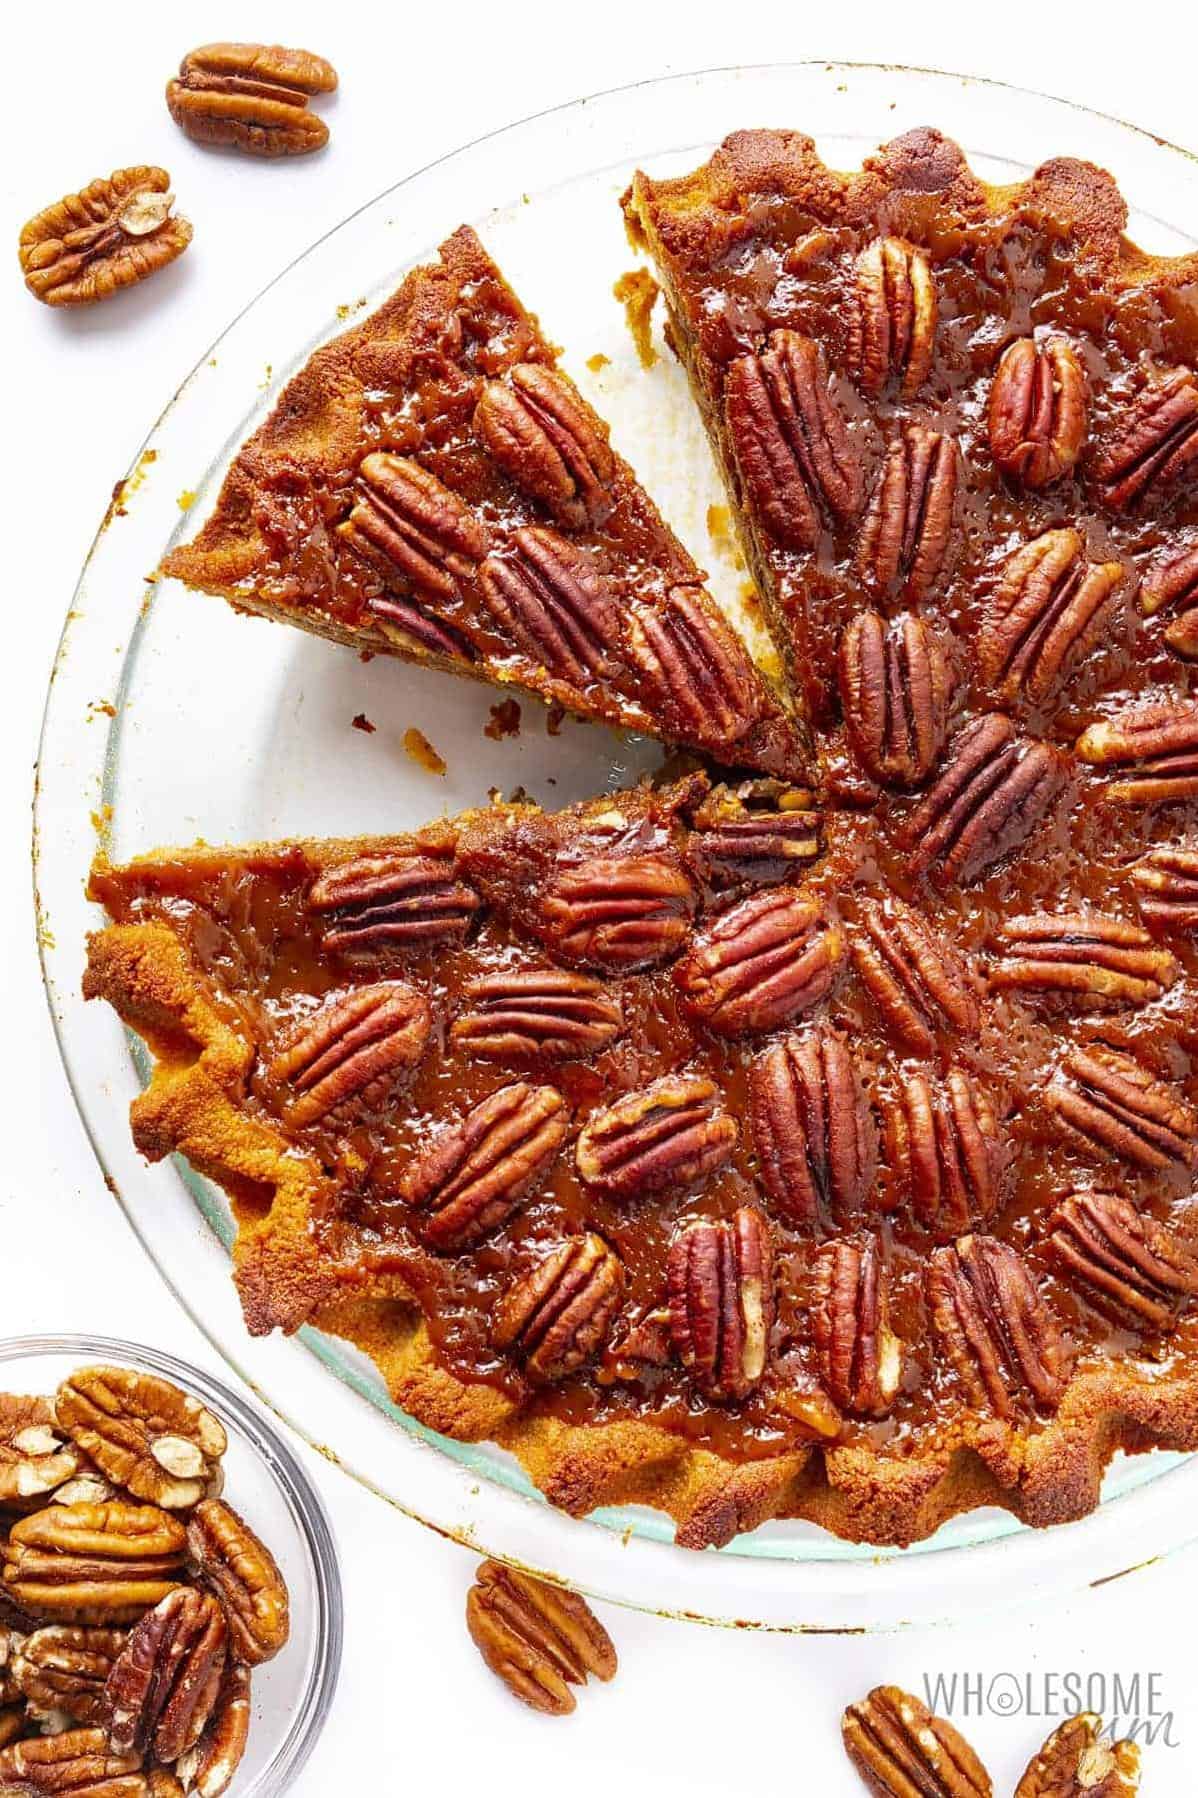  Take a bite of this delicious and healthy Sugar-Free Pecan Pie!